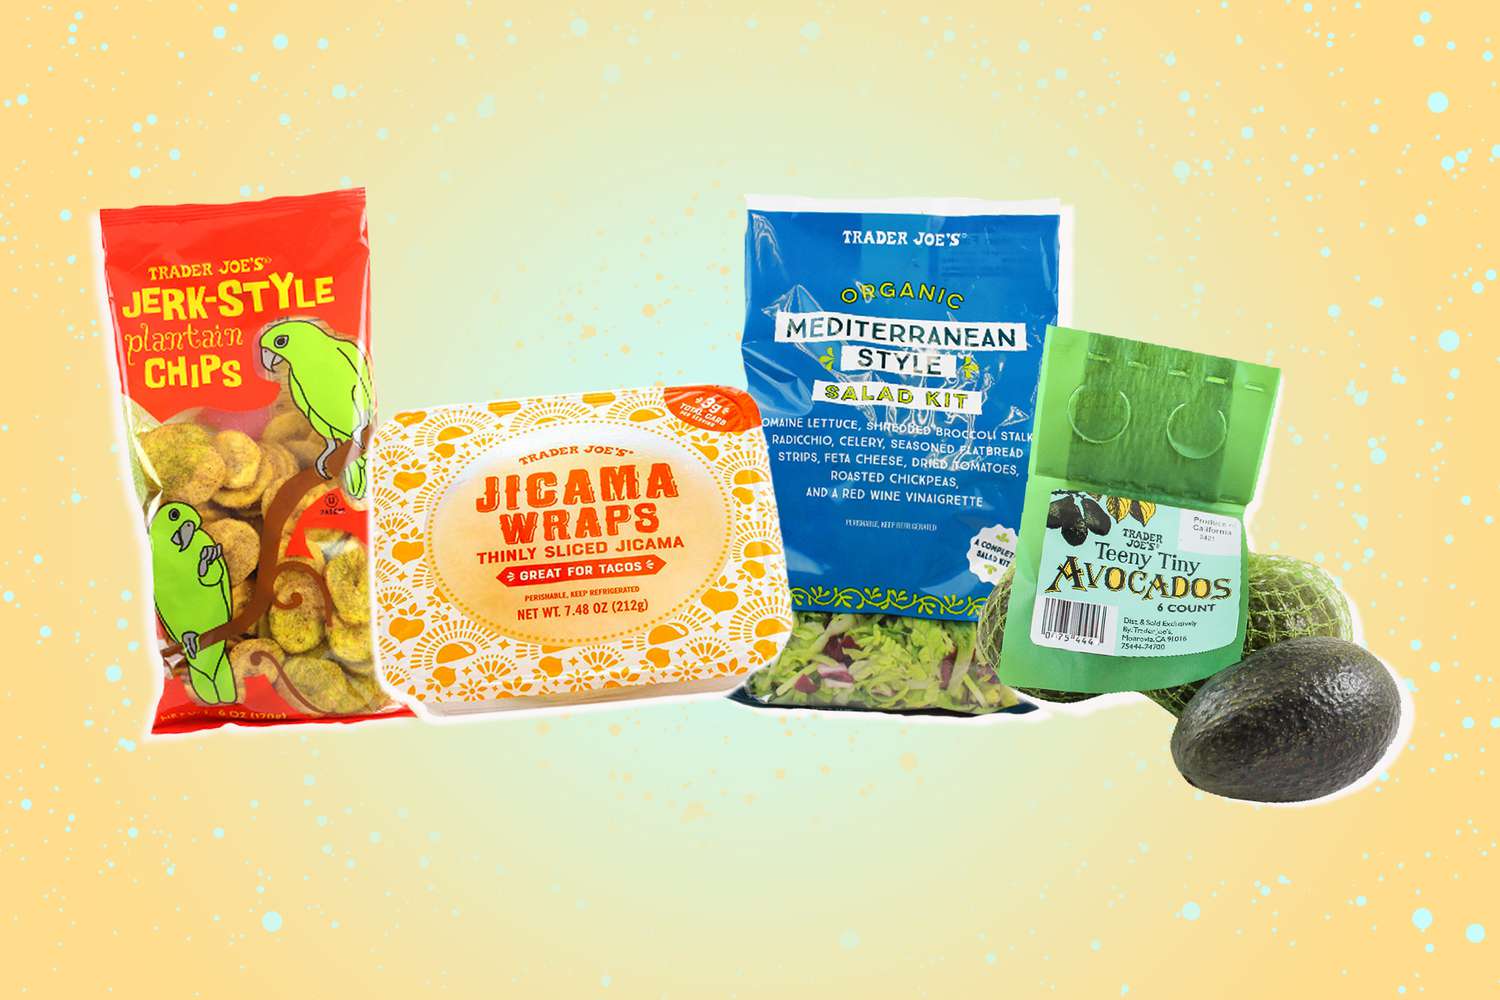 Trader Joe's Products on designed background